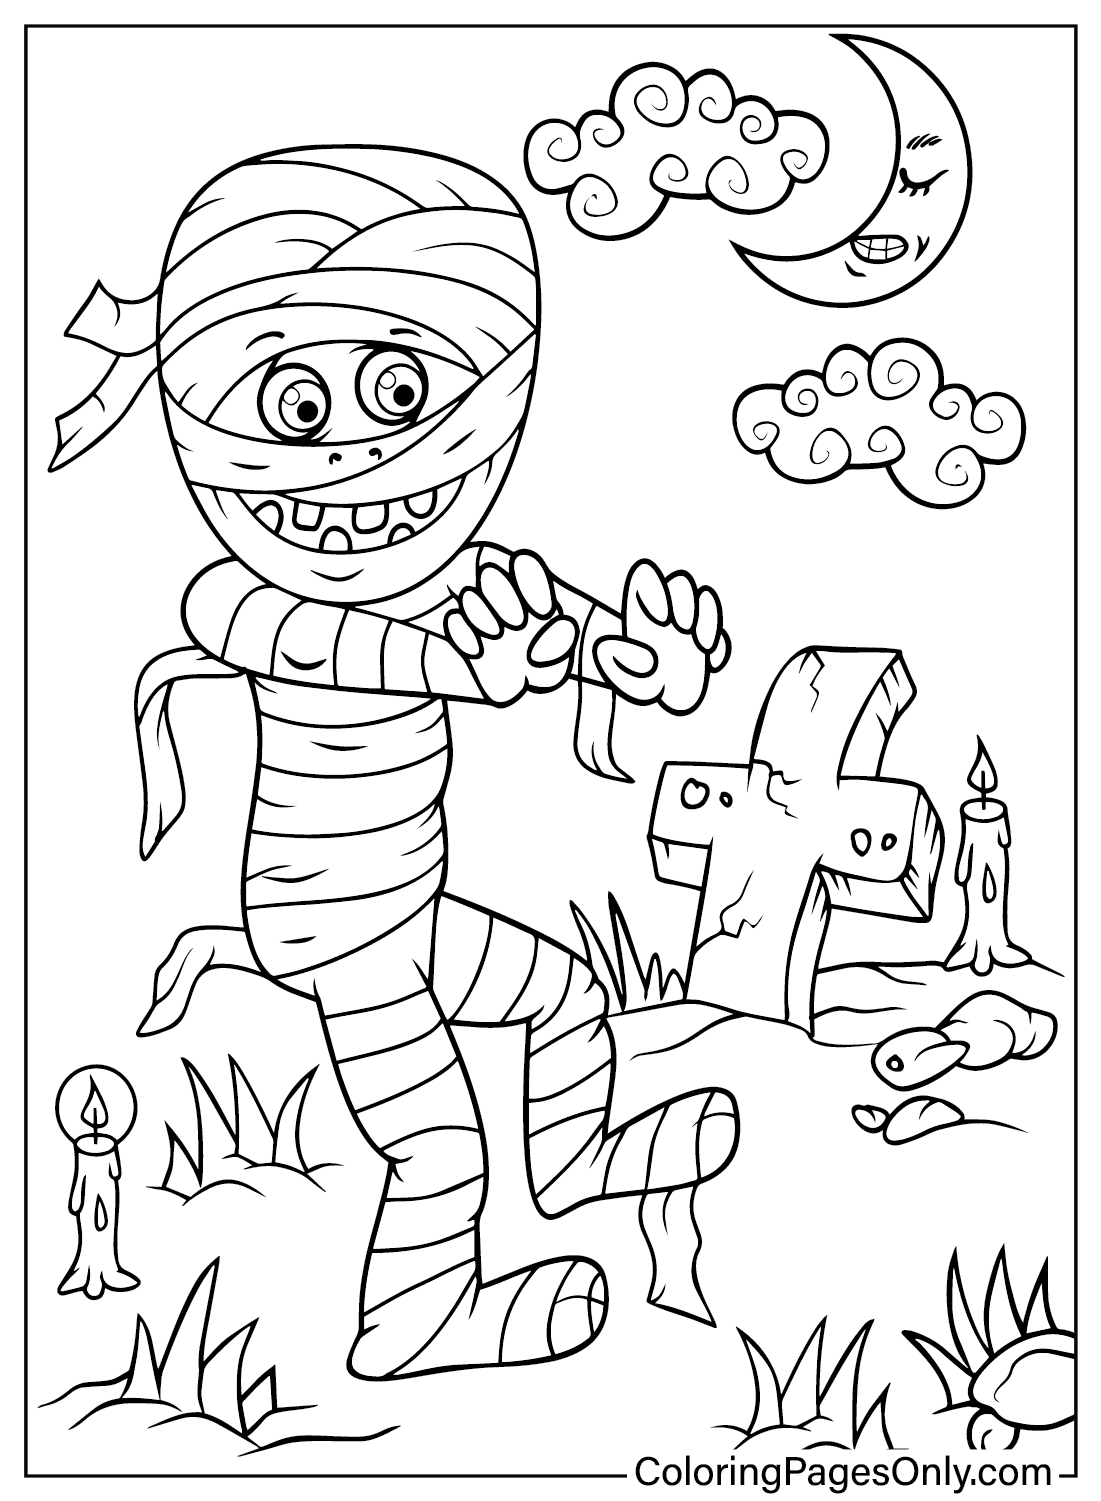 Mummy Coloring Page PNG - Free Printable Coloring Pages